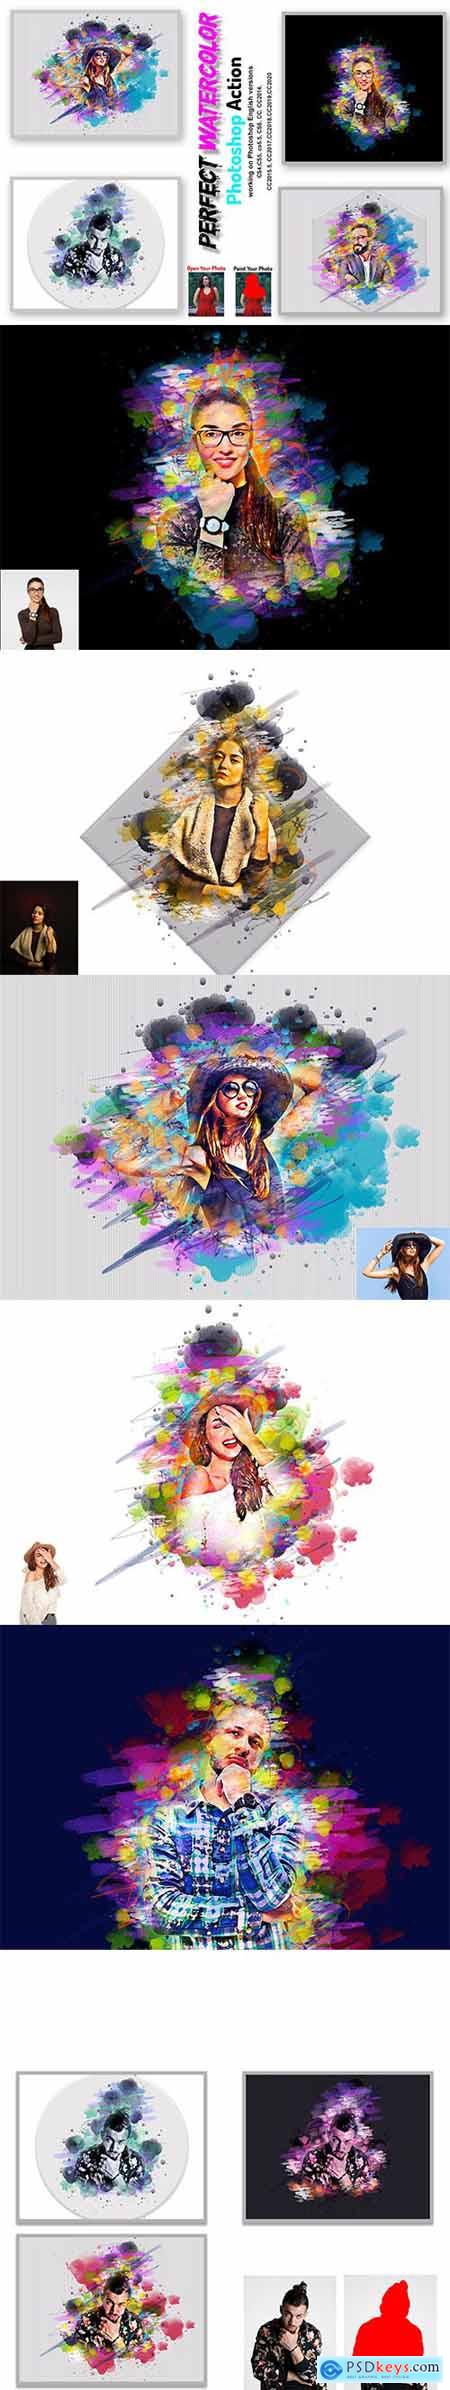 Perfect Watercolor Photoshop Action 5778907